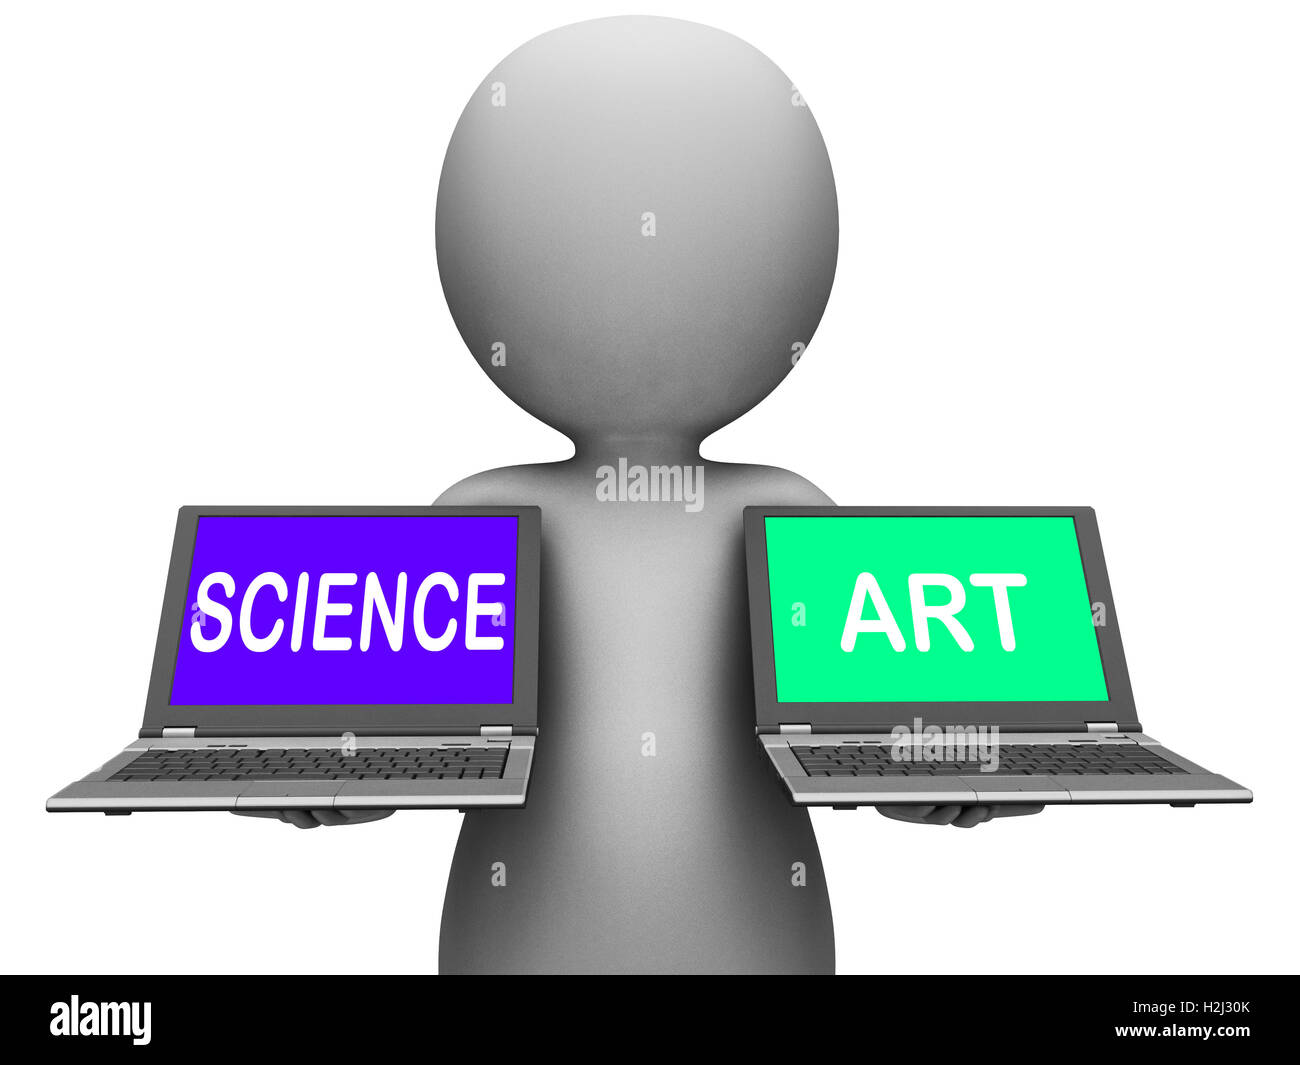 Science Art Laptops Shows Scientific Or Artistic Stock Photo